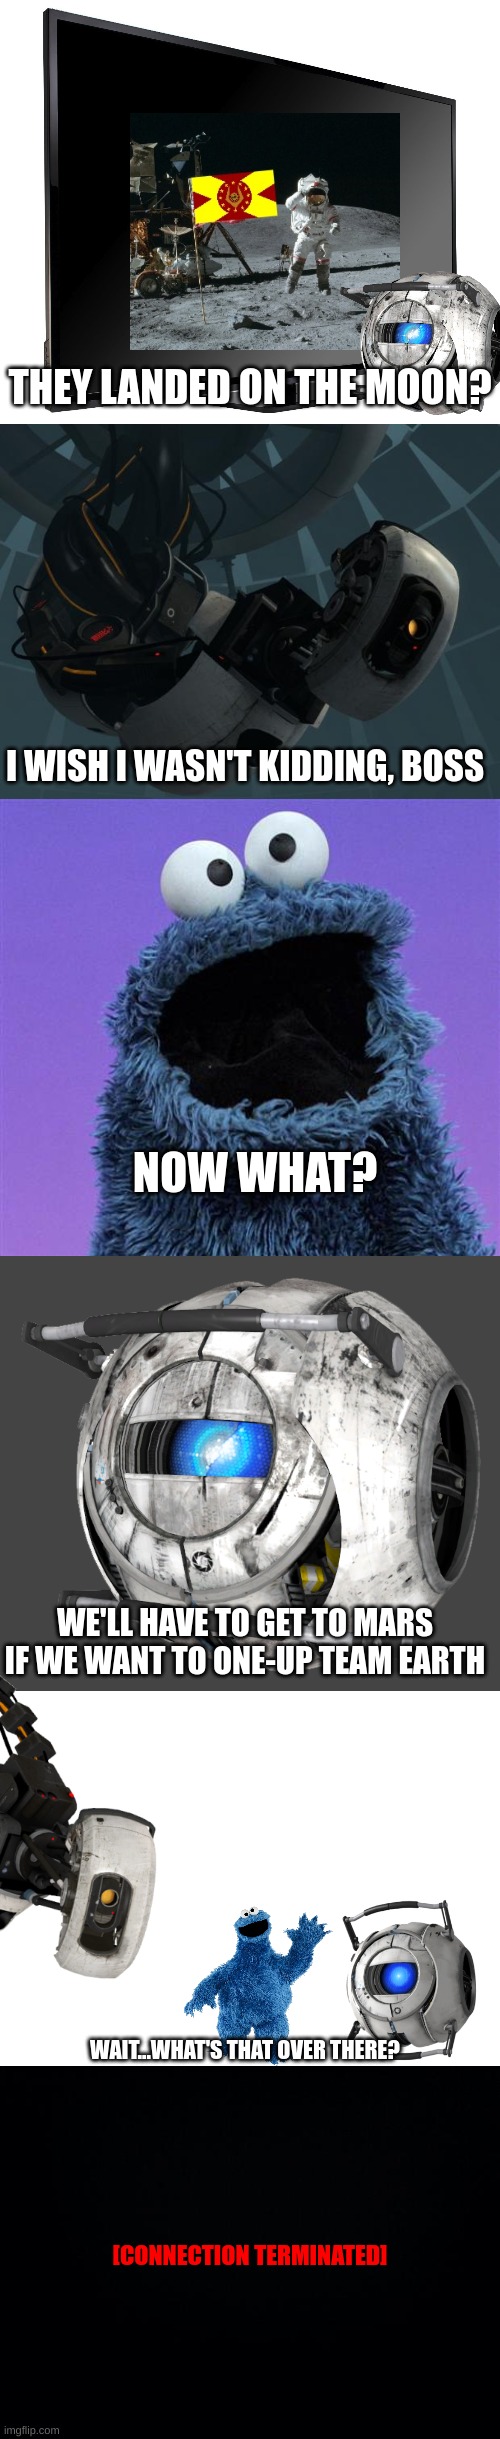 leaked_footage_of_wheatley_base.mp4 | THEY LANDED ON THE MOON? I WISH I WASN'T KIDDING, BOSS; NOW WHAT? WE'LL HAVE TO GET TO MARS IF WE WANT TO ONE-UP TEAM EARTH; WAIT...WHAT'S THAT OVER THERE? [CONNECTION TERMINATED] | image tagged in television tv,glados,cookie monster,wheatley,blank white template,black background | made w/ Imgflip meme maker